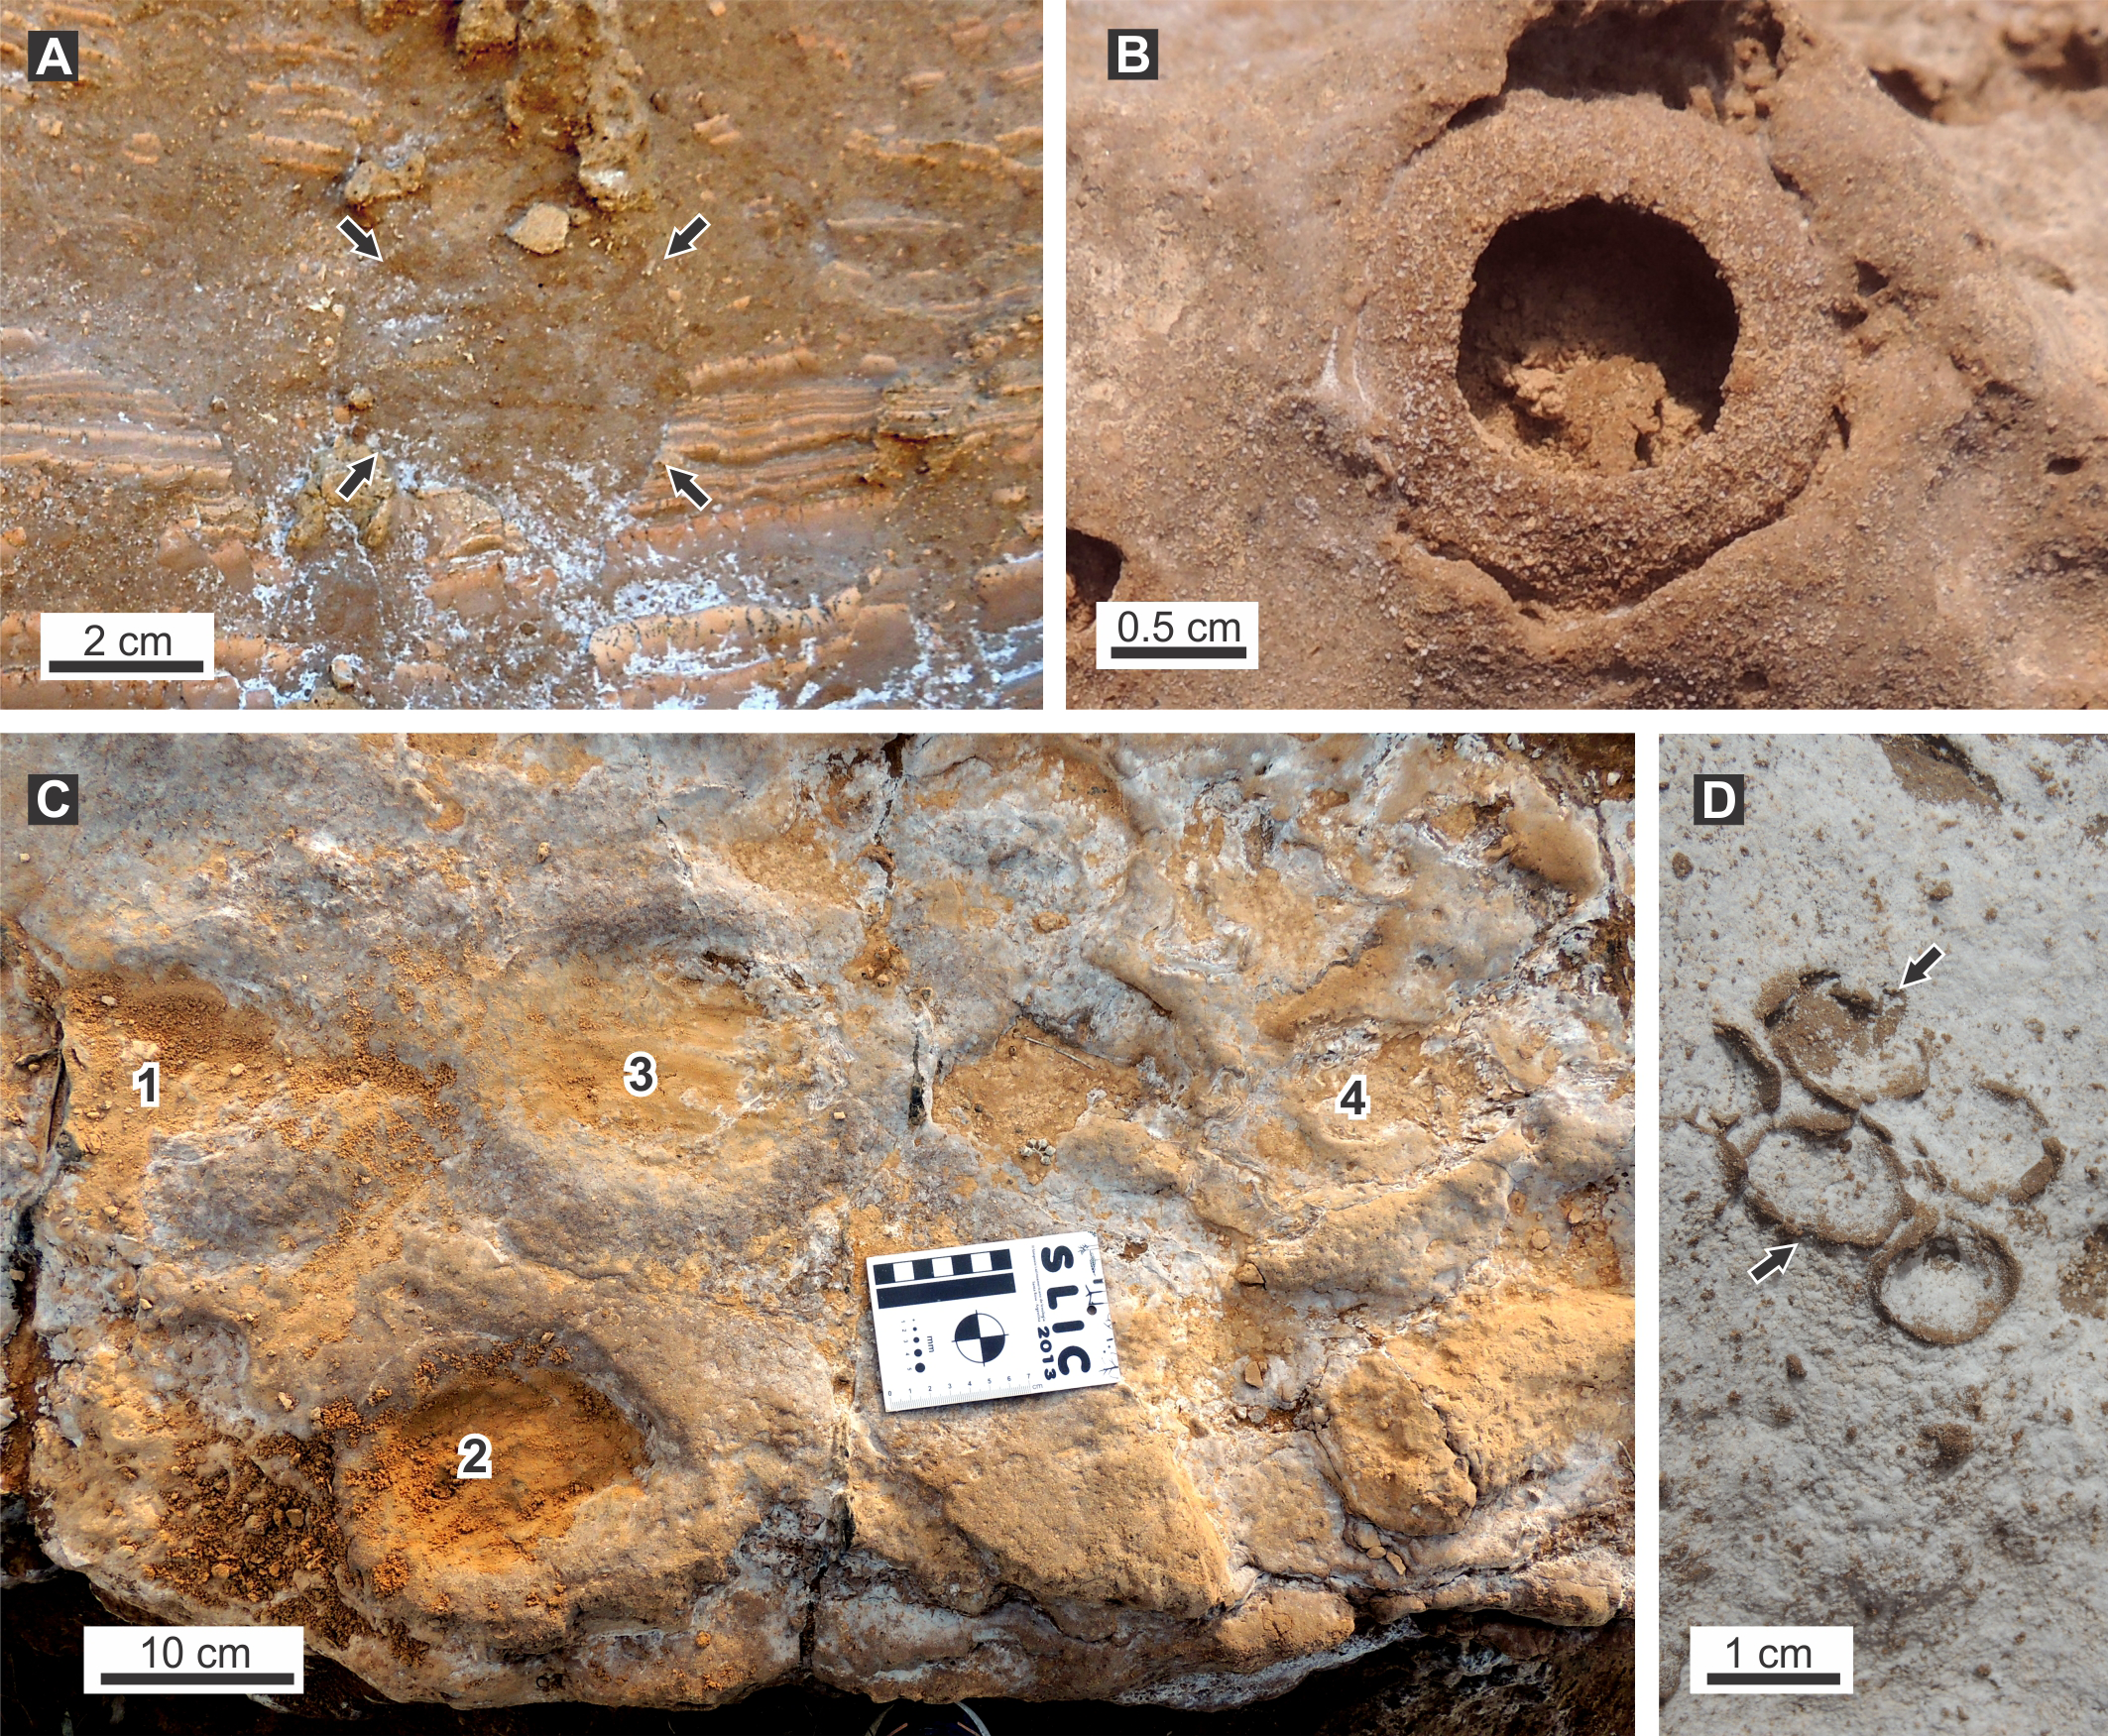 Large mammal burrows in late Miocene calcic paleosols from central